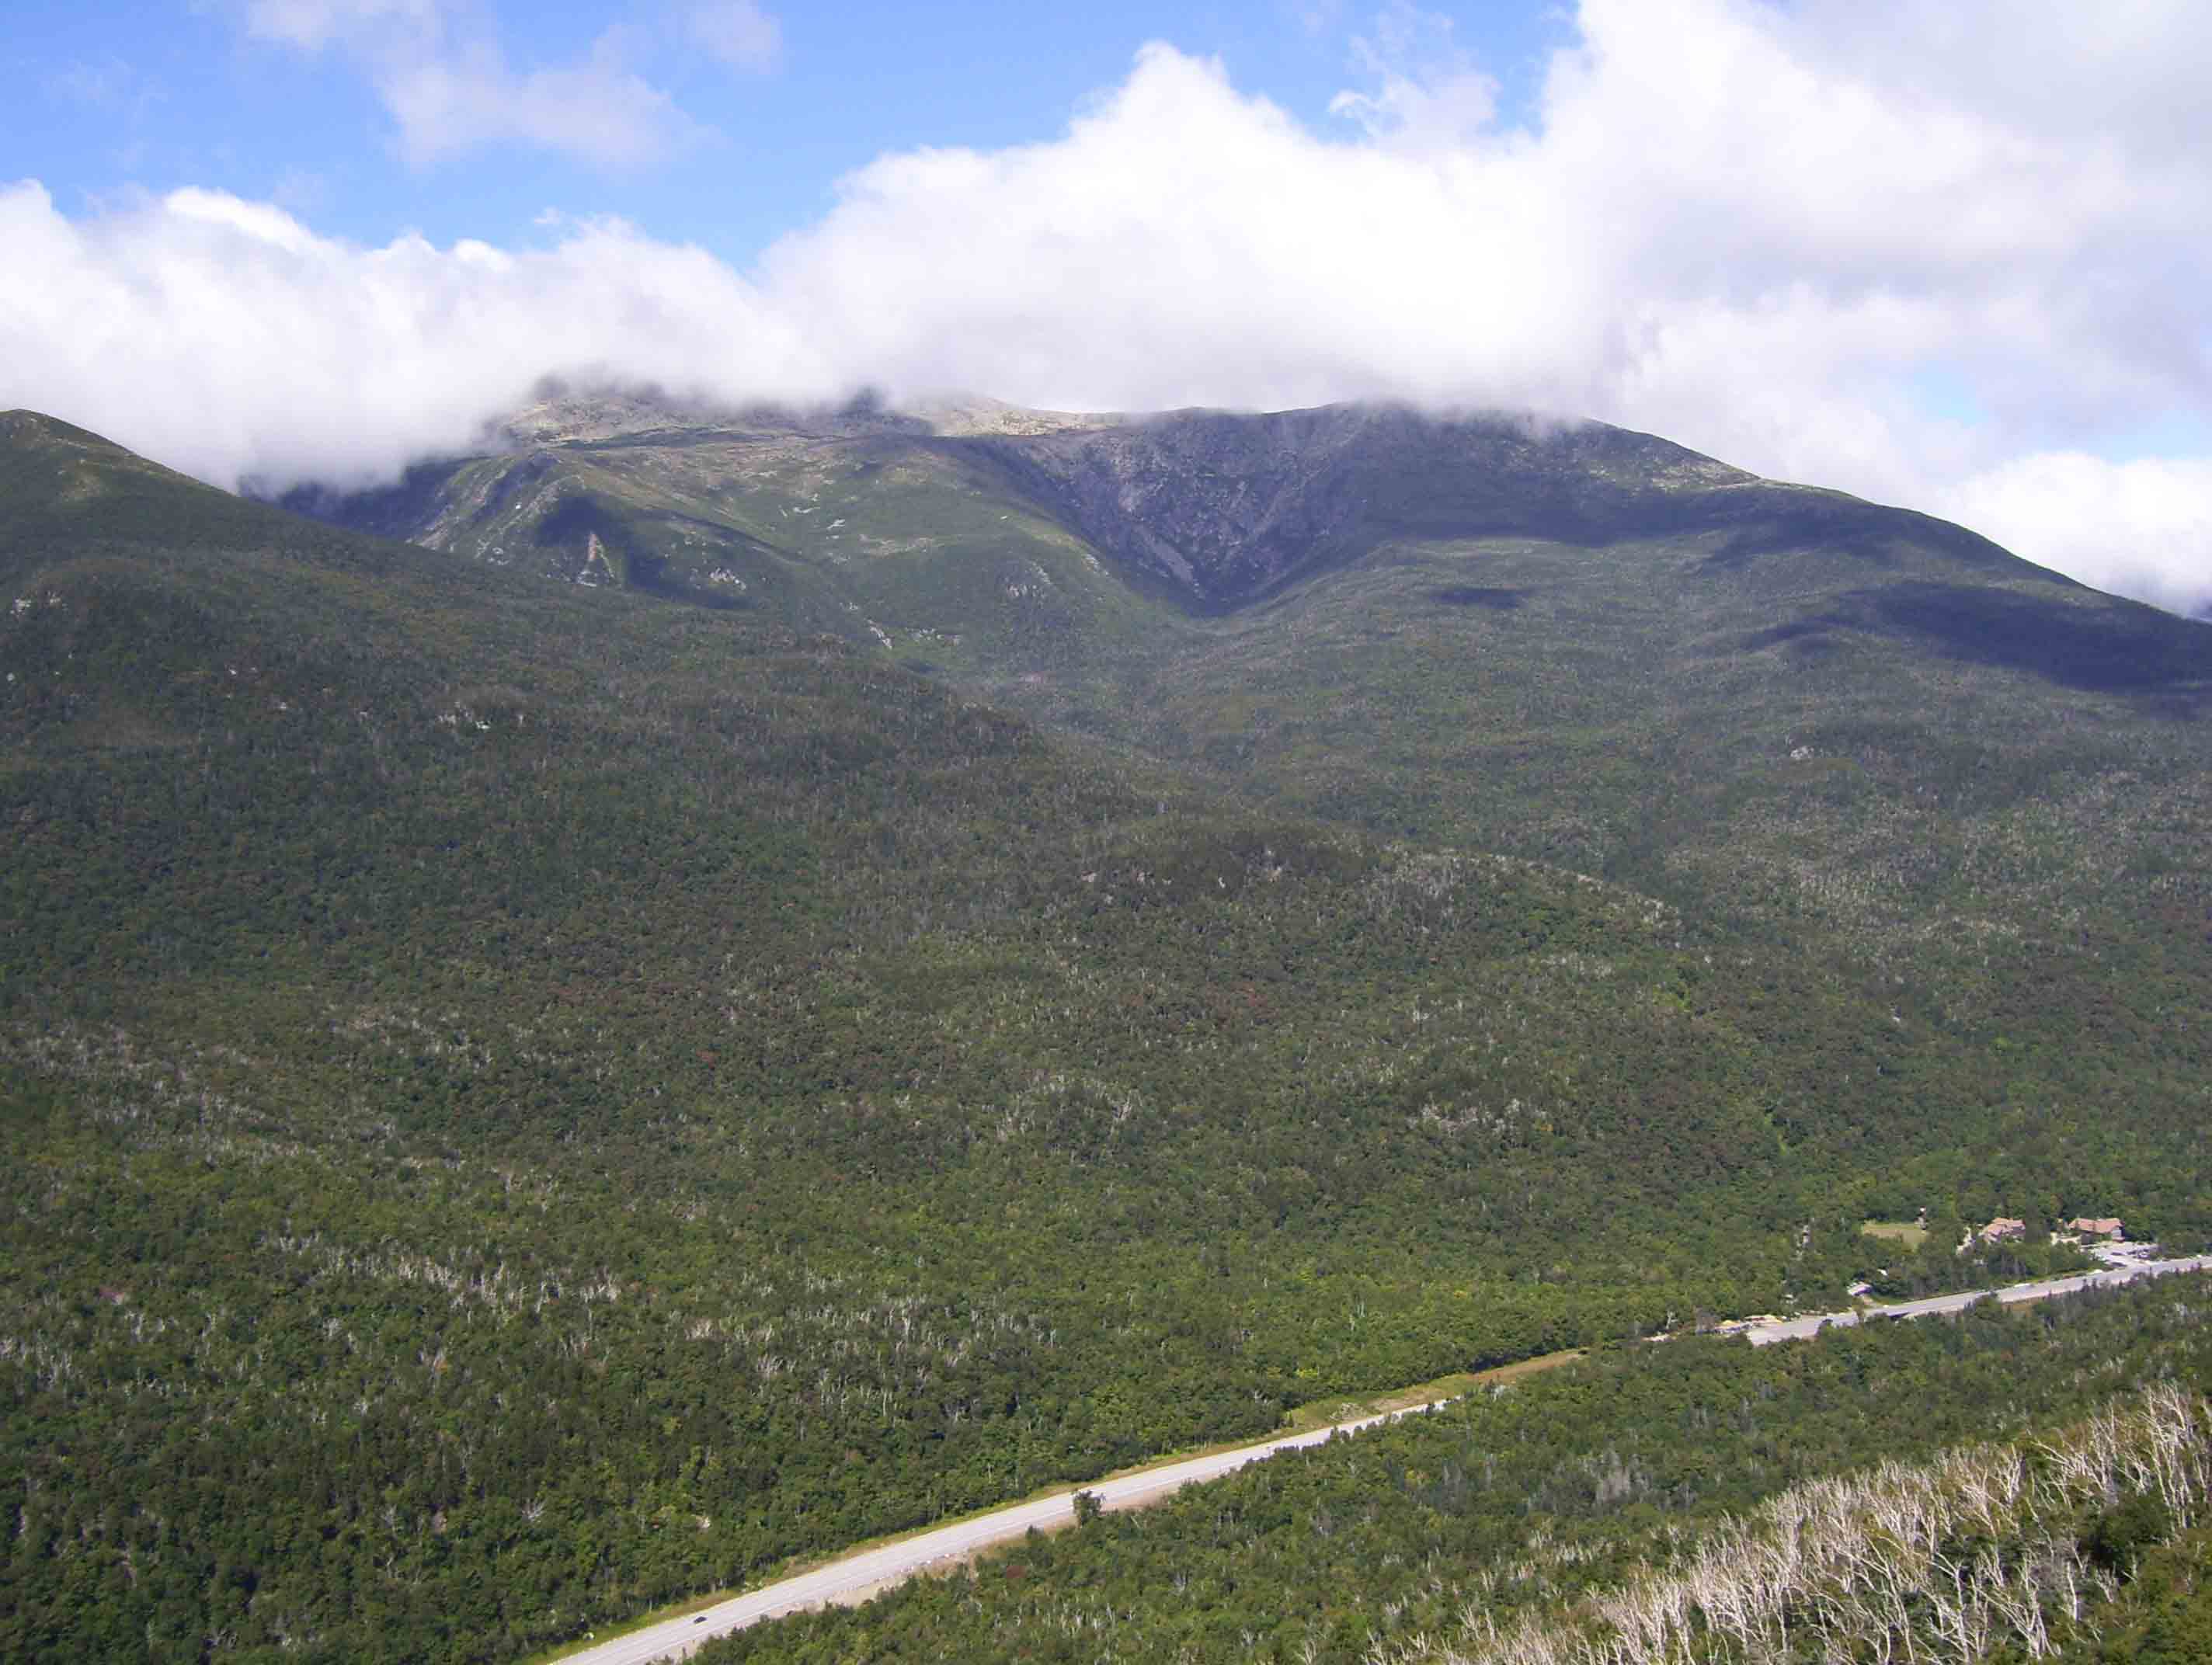 Pinkham Notch and Mt Washington (with summit in clouds) from the ledge at approximately mile 19.9.  Courtesy dlcul@conncoll.edu